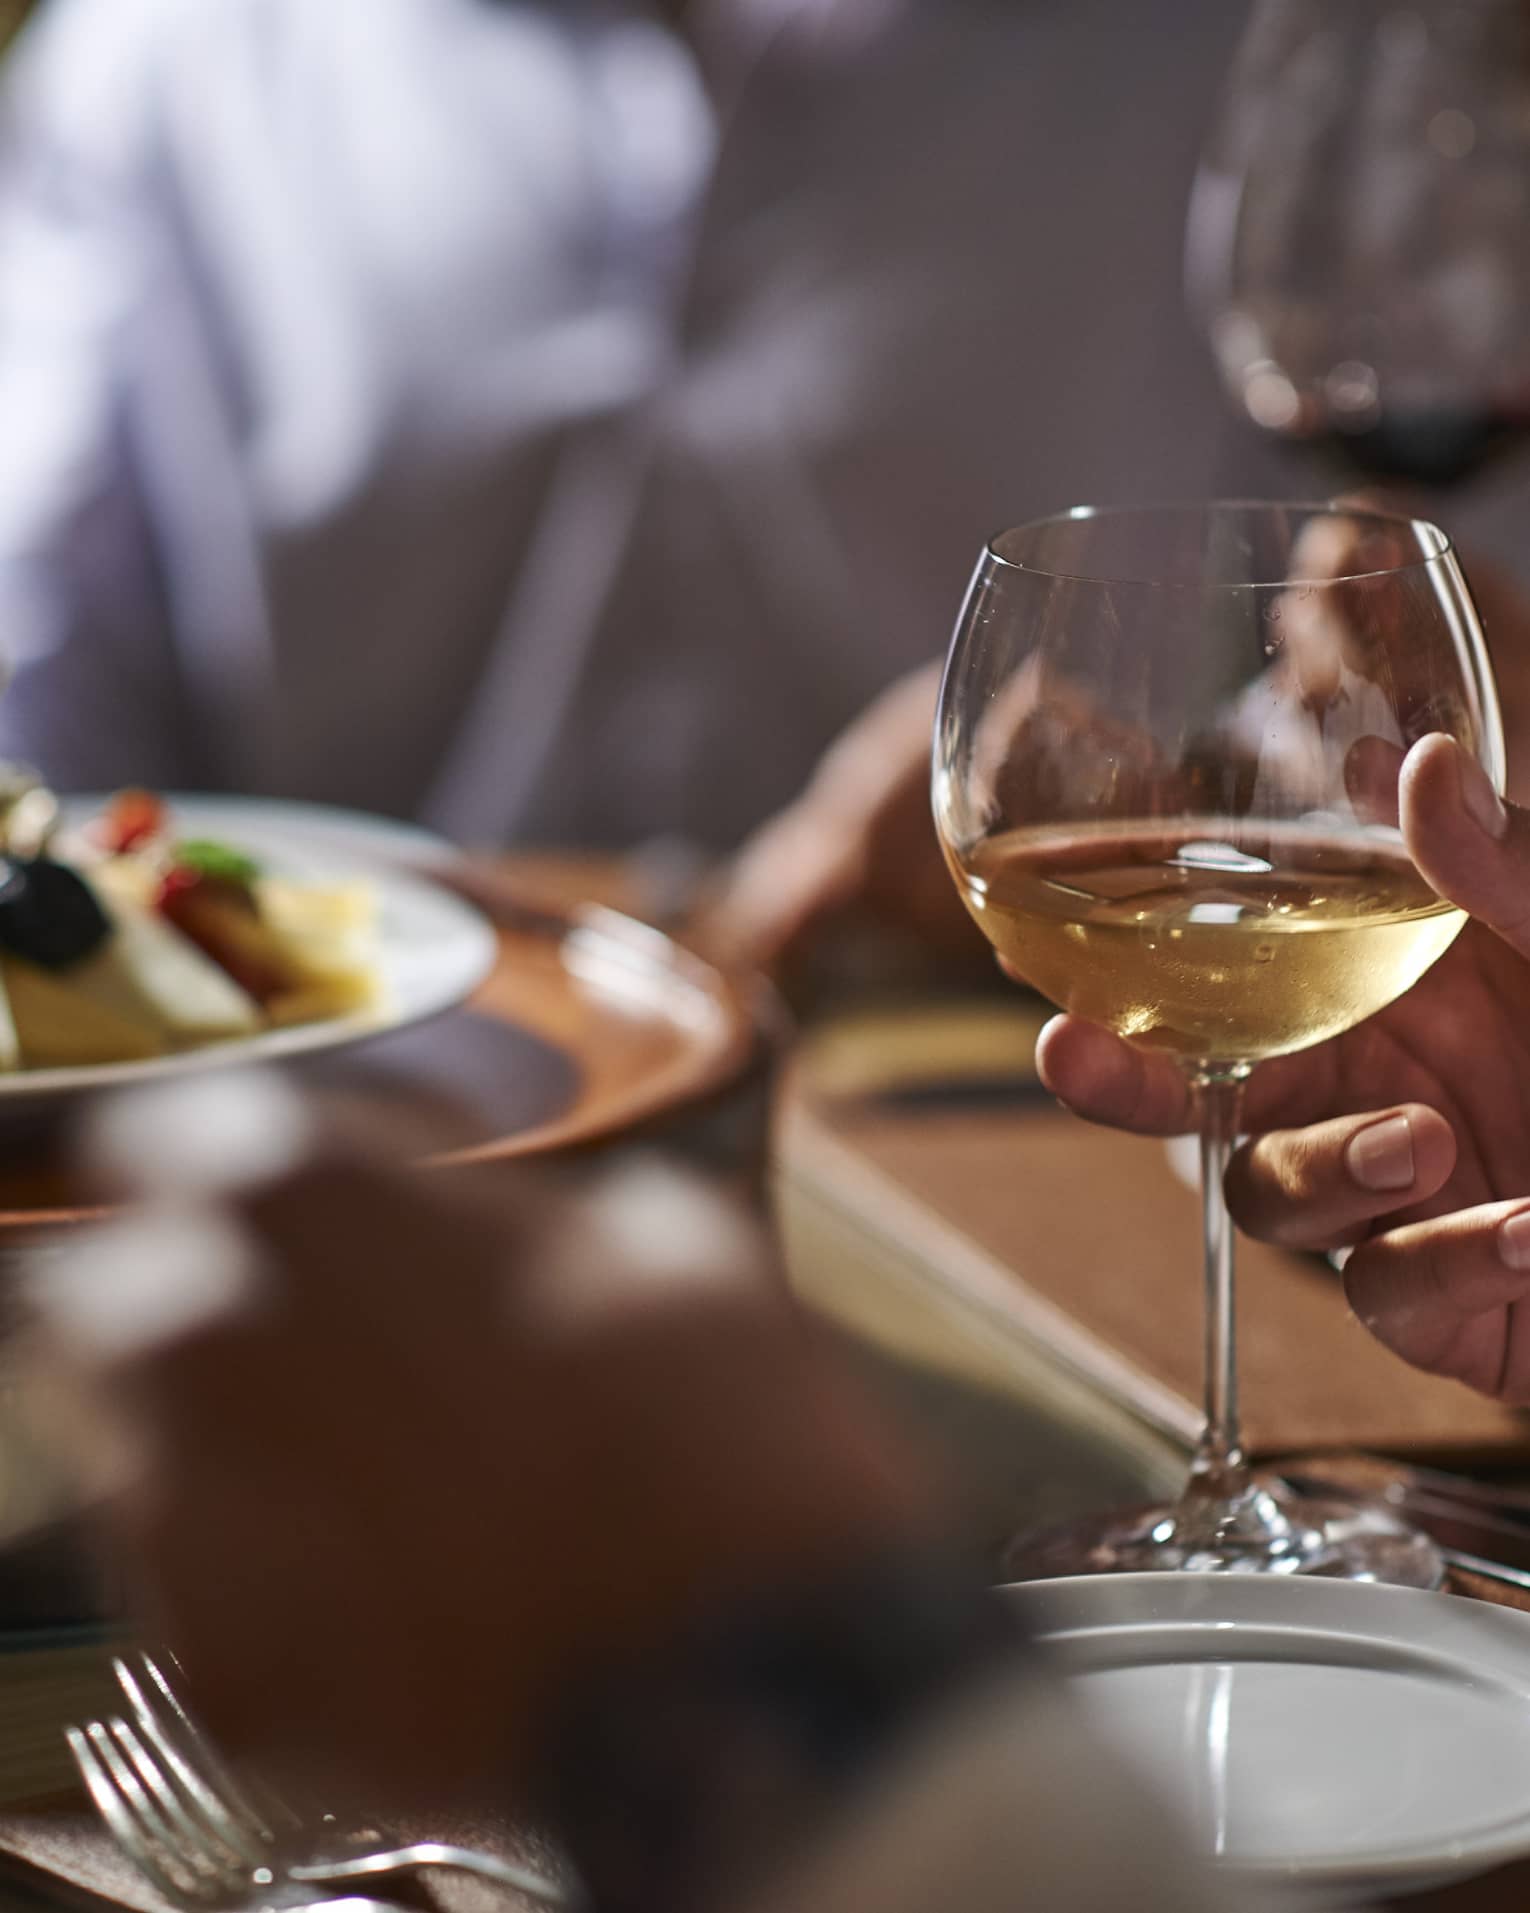 Close-up of hand holding wine glass by dinner plate on table